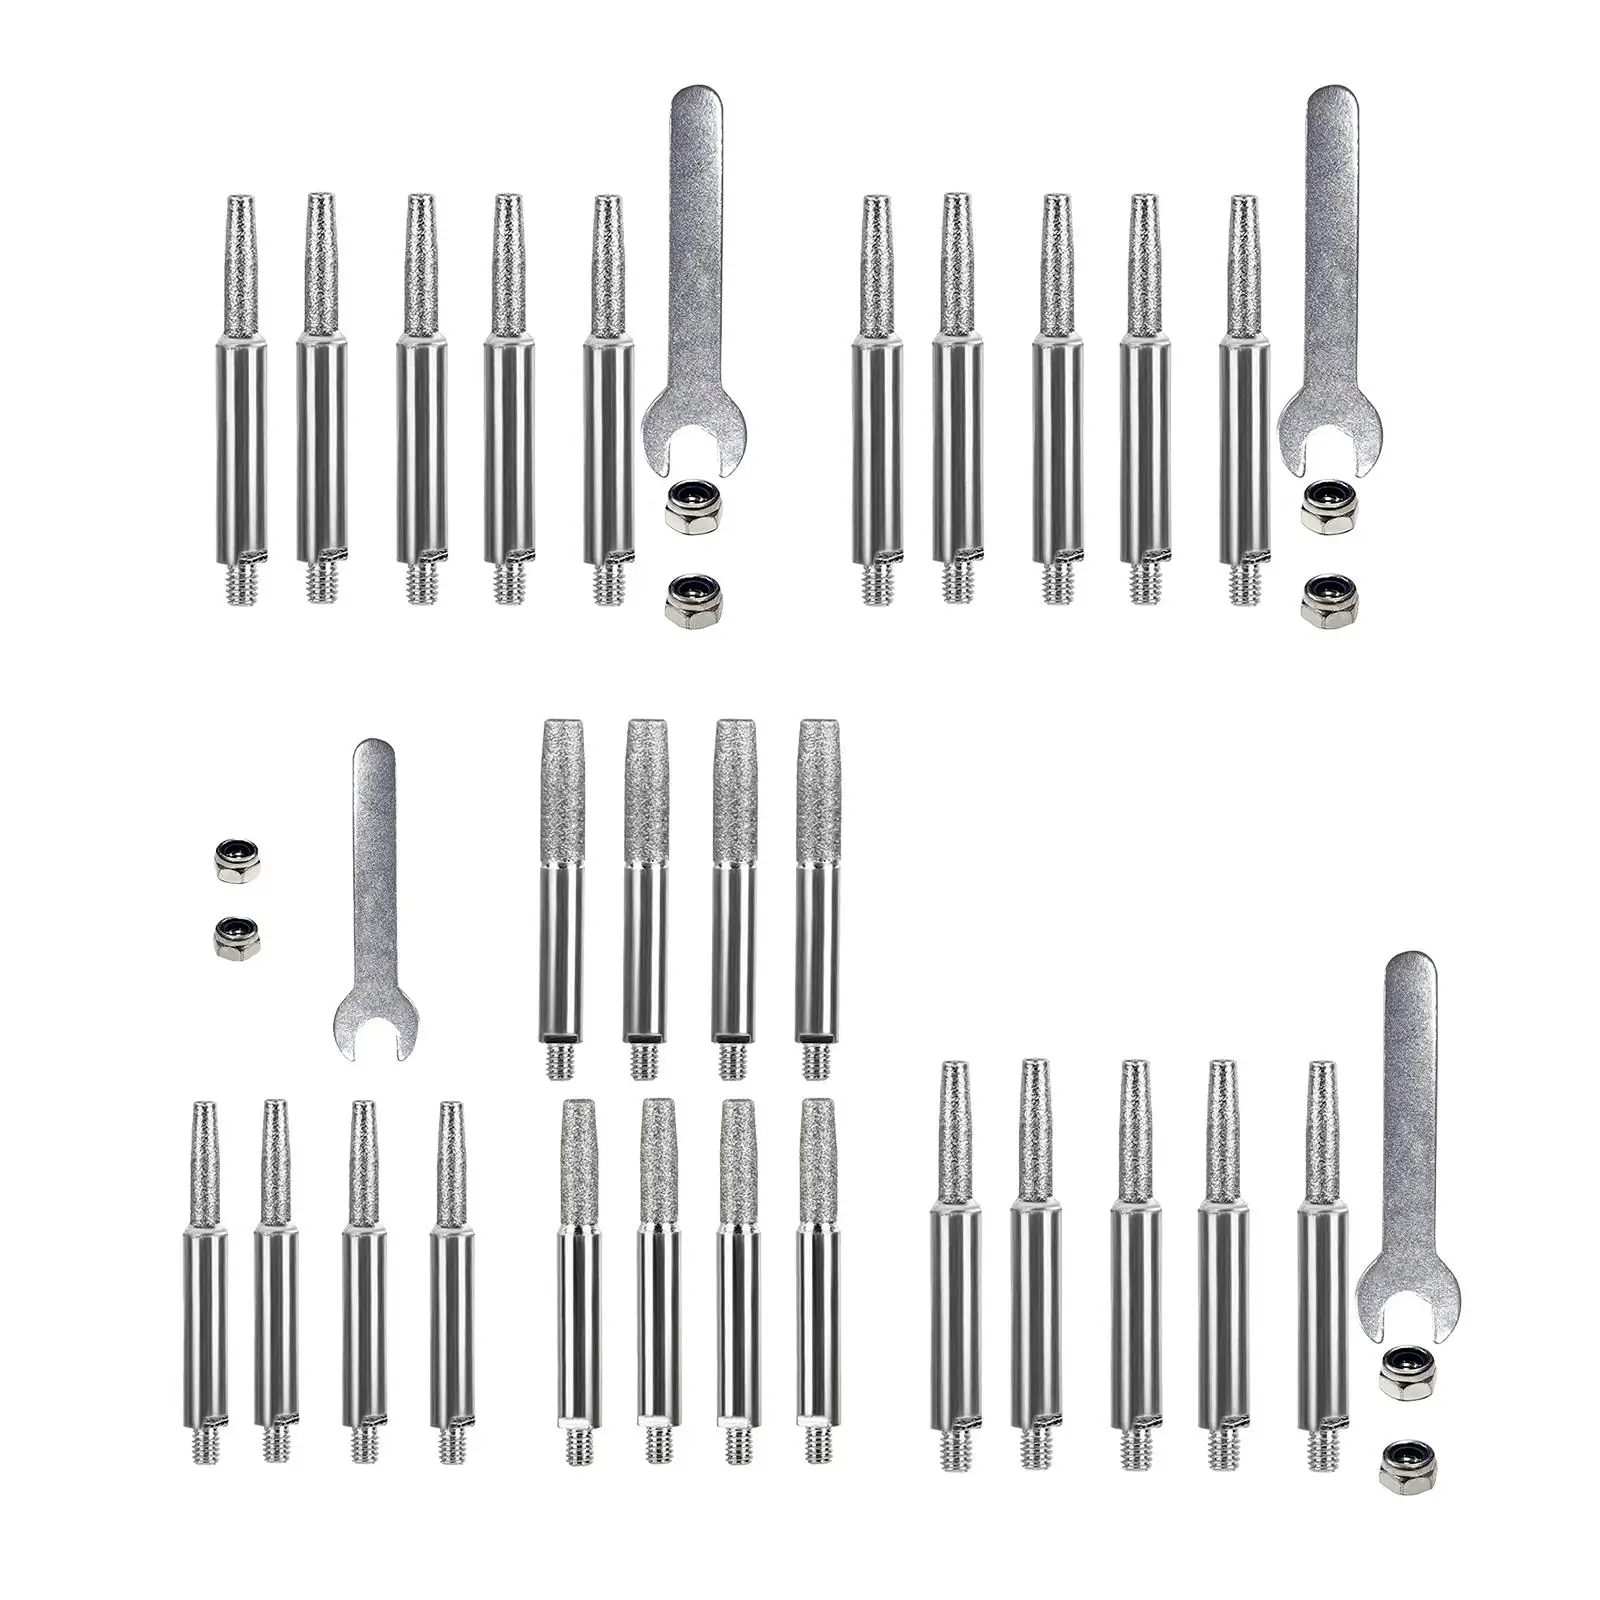 Burr Bit Set High Hardness Engraving Bit Replacement Wheels for Electric Saw Steel and Wood Working Drilling